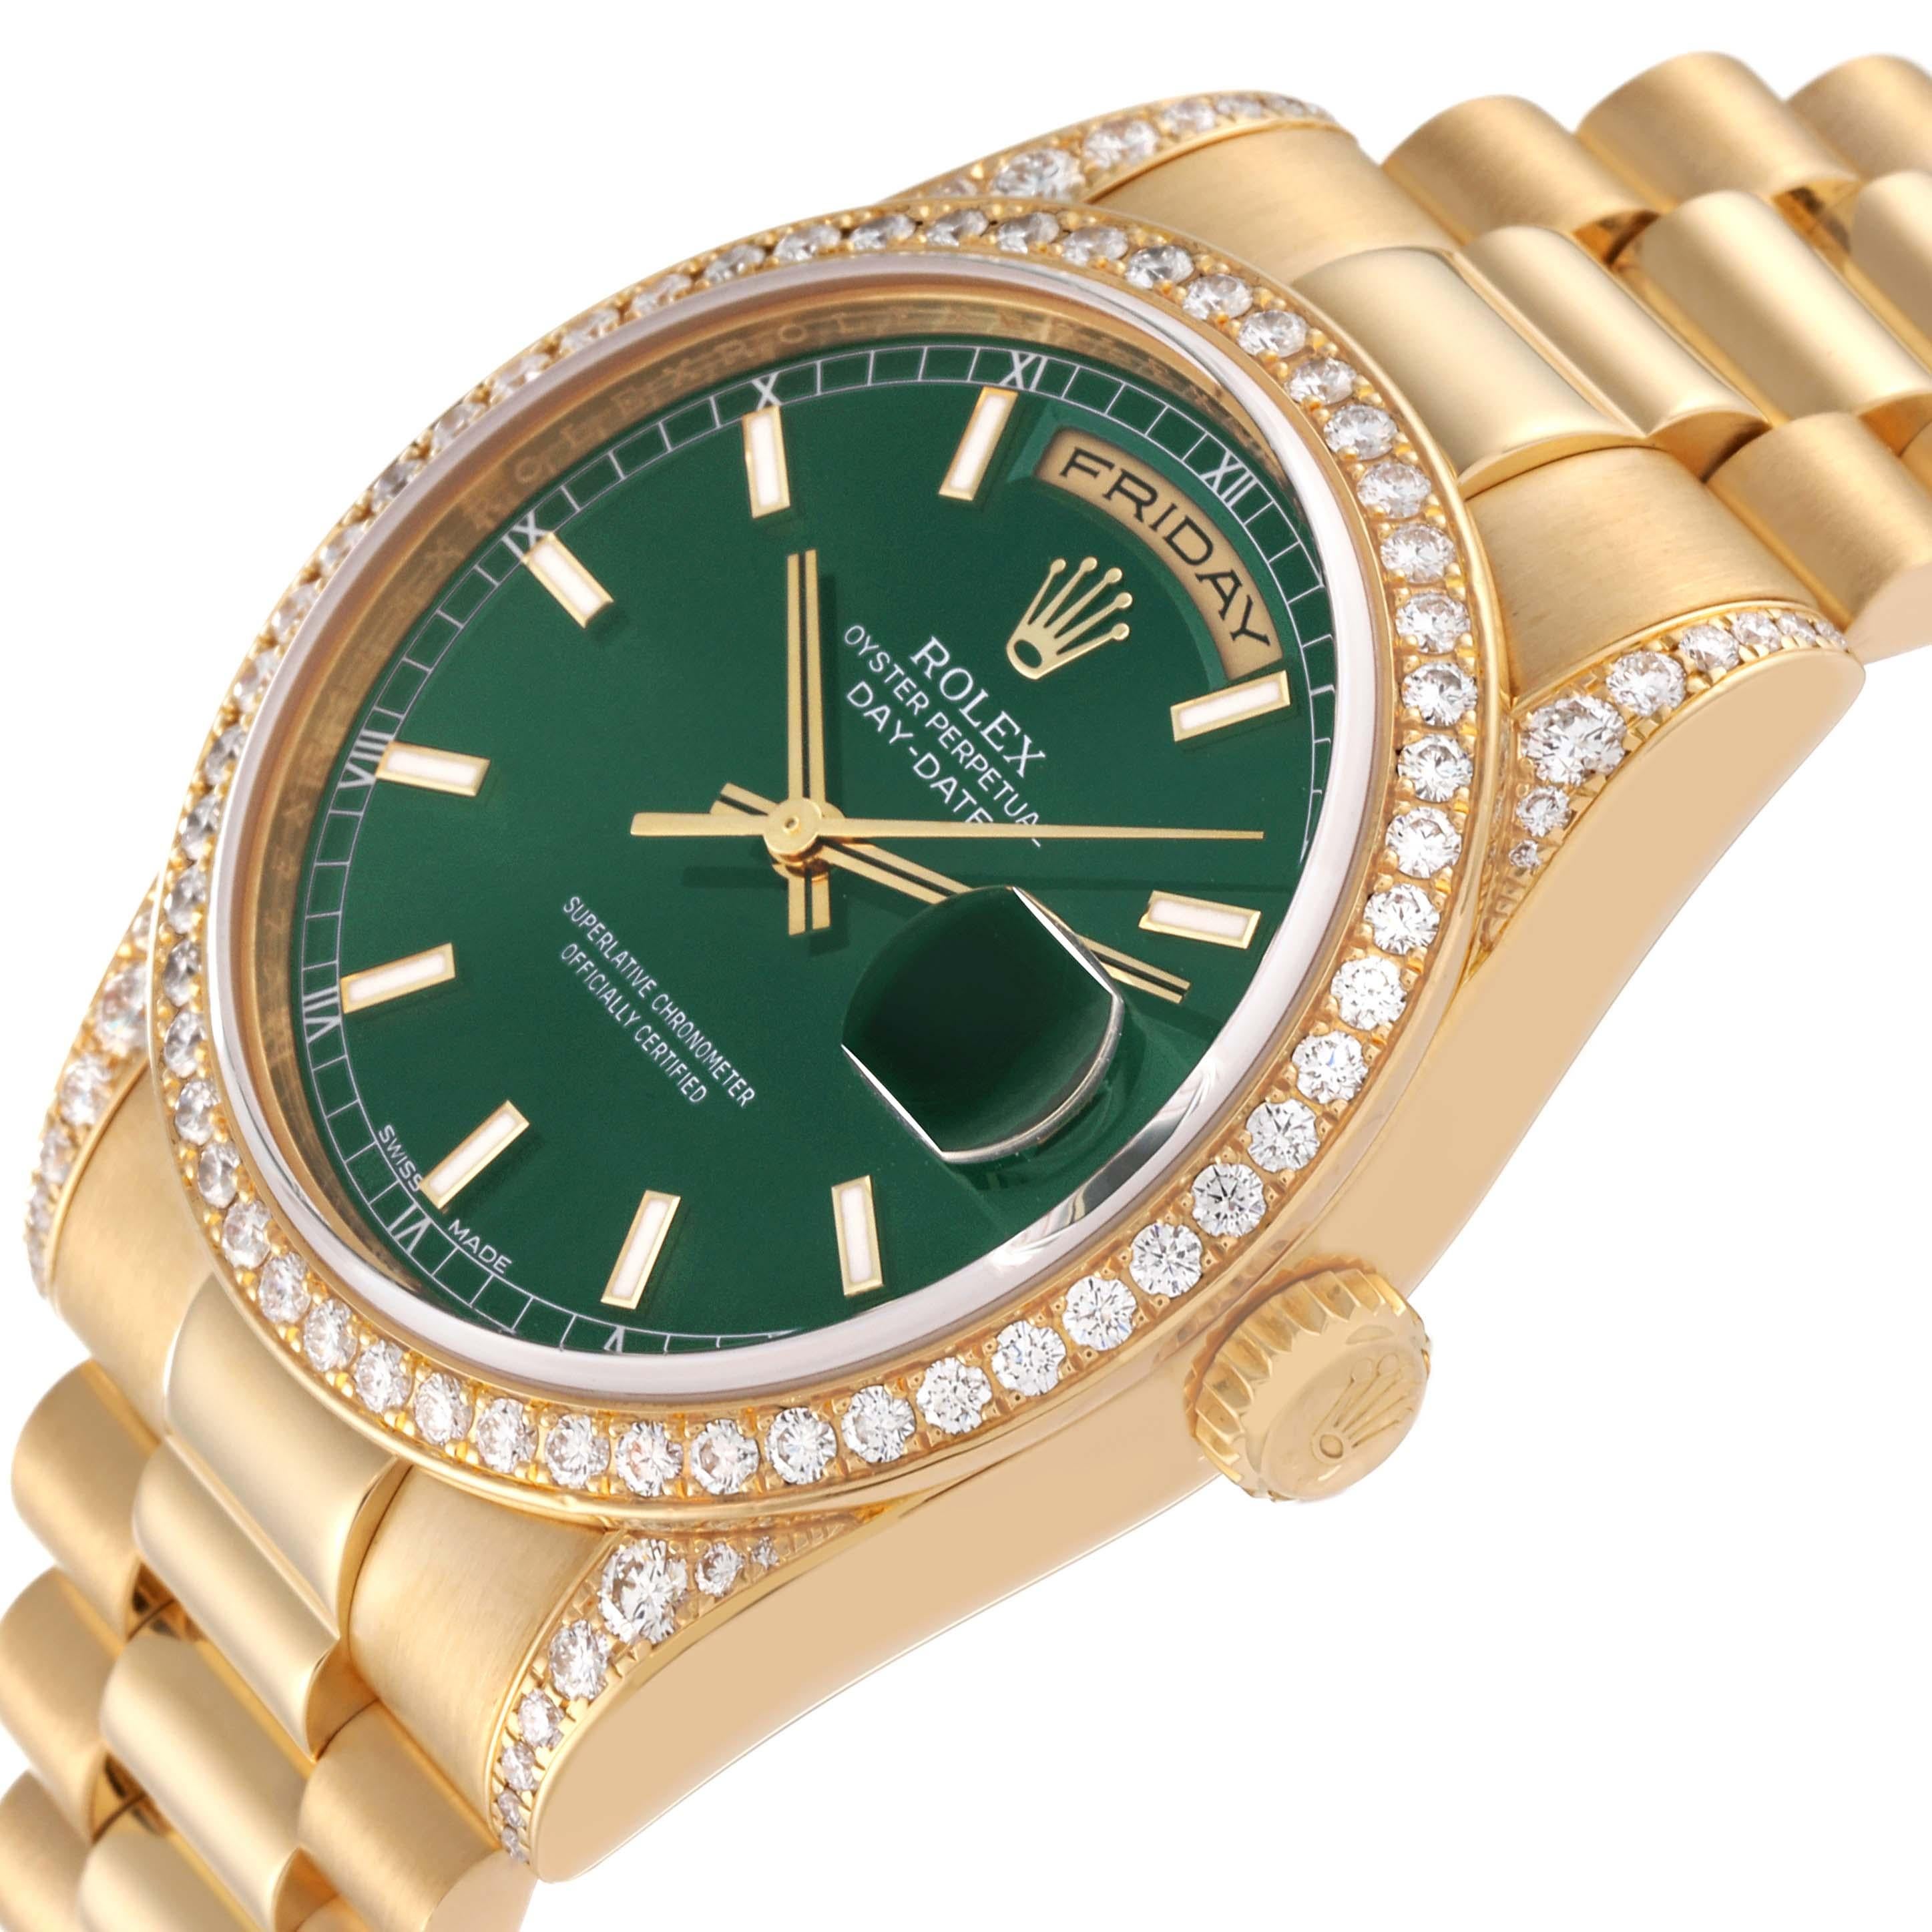 Rolex President Day-Date 36 Yellow Gold Diamond Mens Watch 118388 Box Card In Excellent Condition For Sale In Atlanta, GA